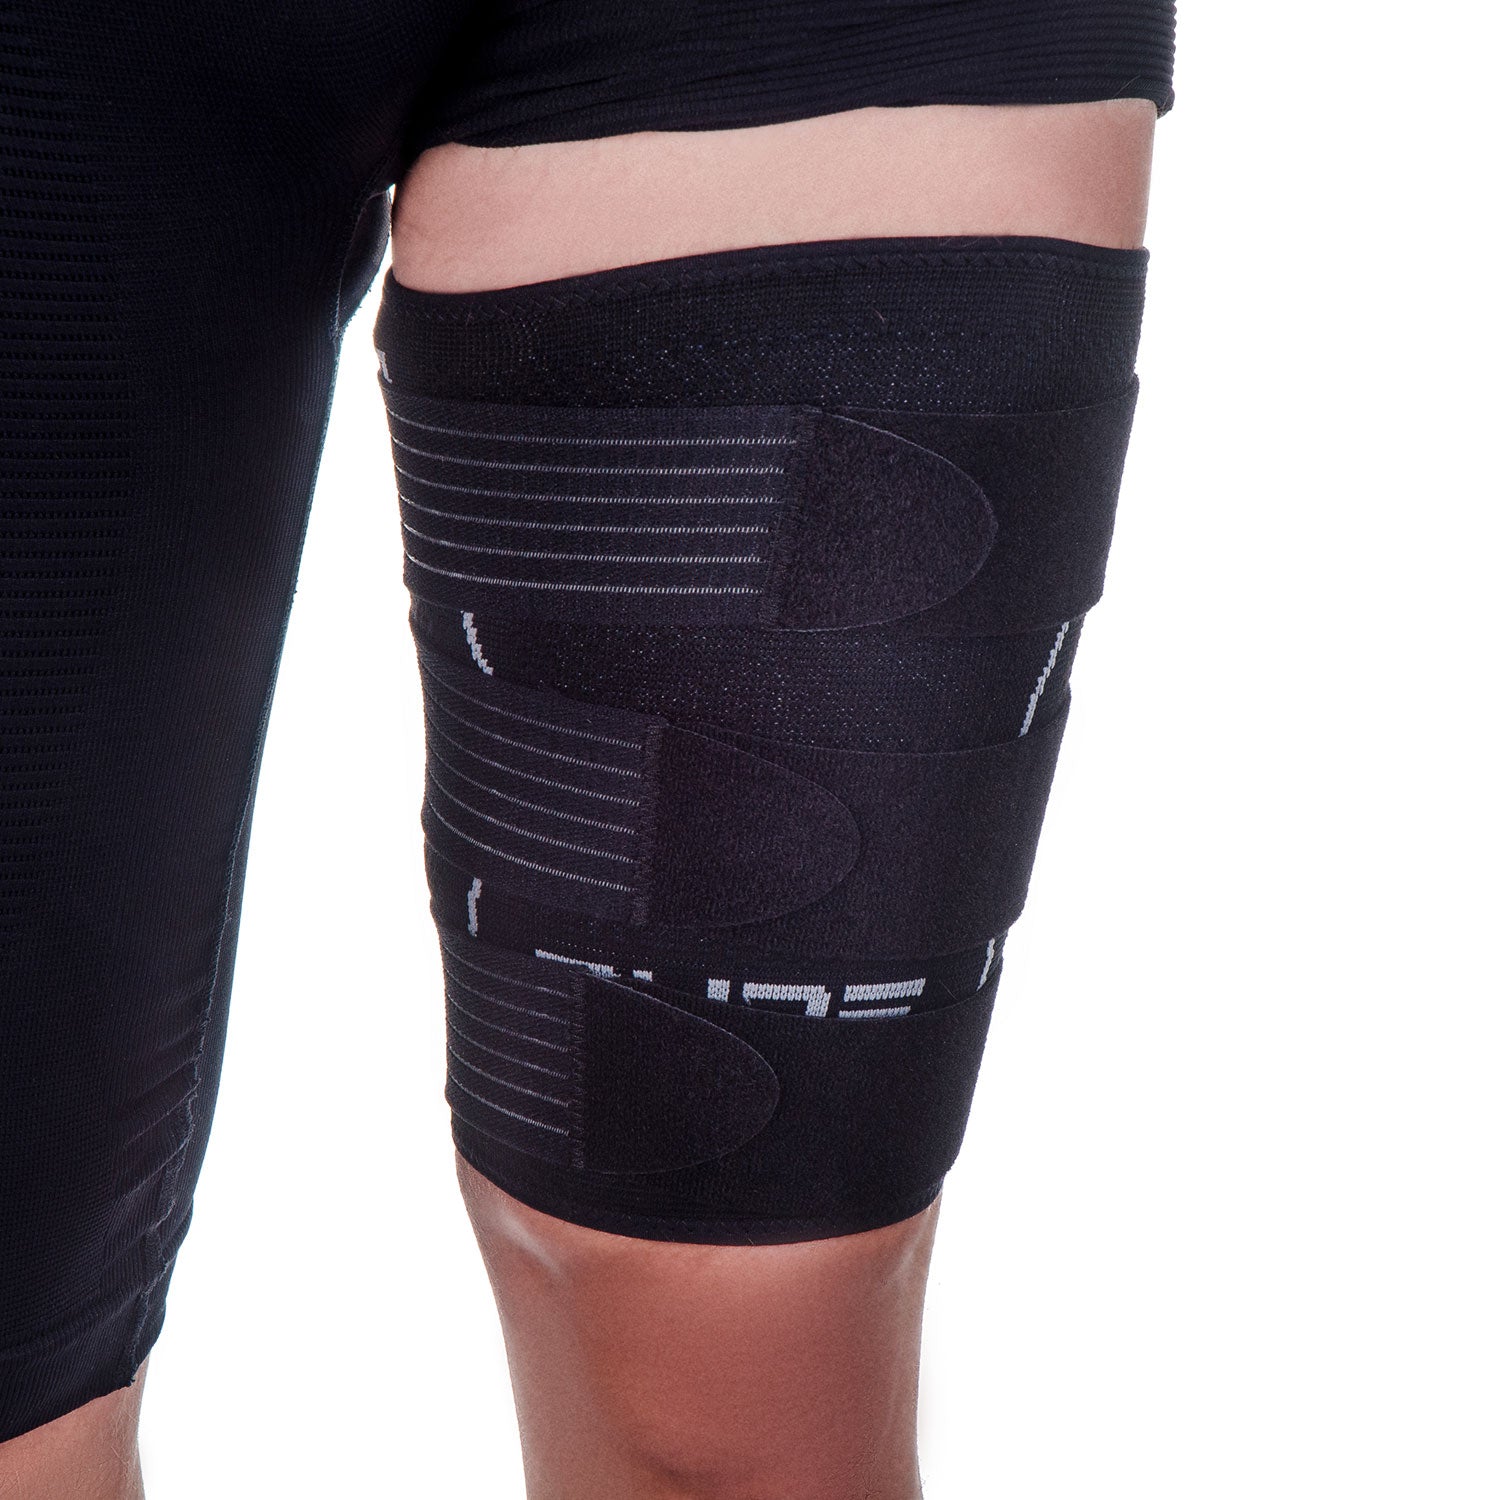  Thigh Compression Sleeves (Pair), Unisex, Hamstring Compression  Sleeve for Quad & Groin Pain Relief & Recovery, Thigh Brace & Wrap Great  for Running Sports & Injury, Upper Leg Sleeves Black XL 